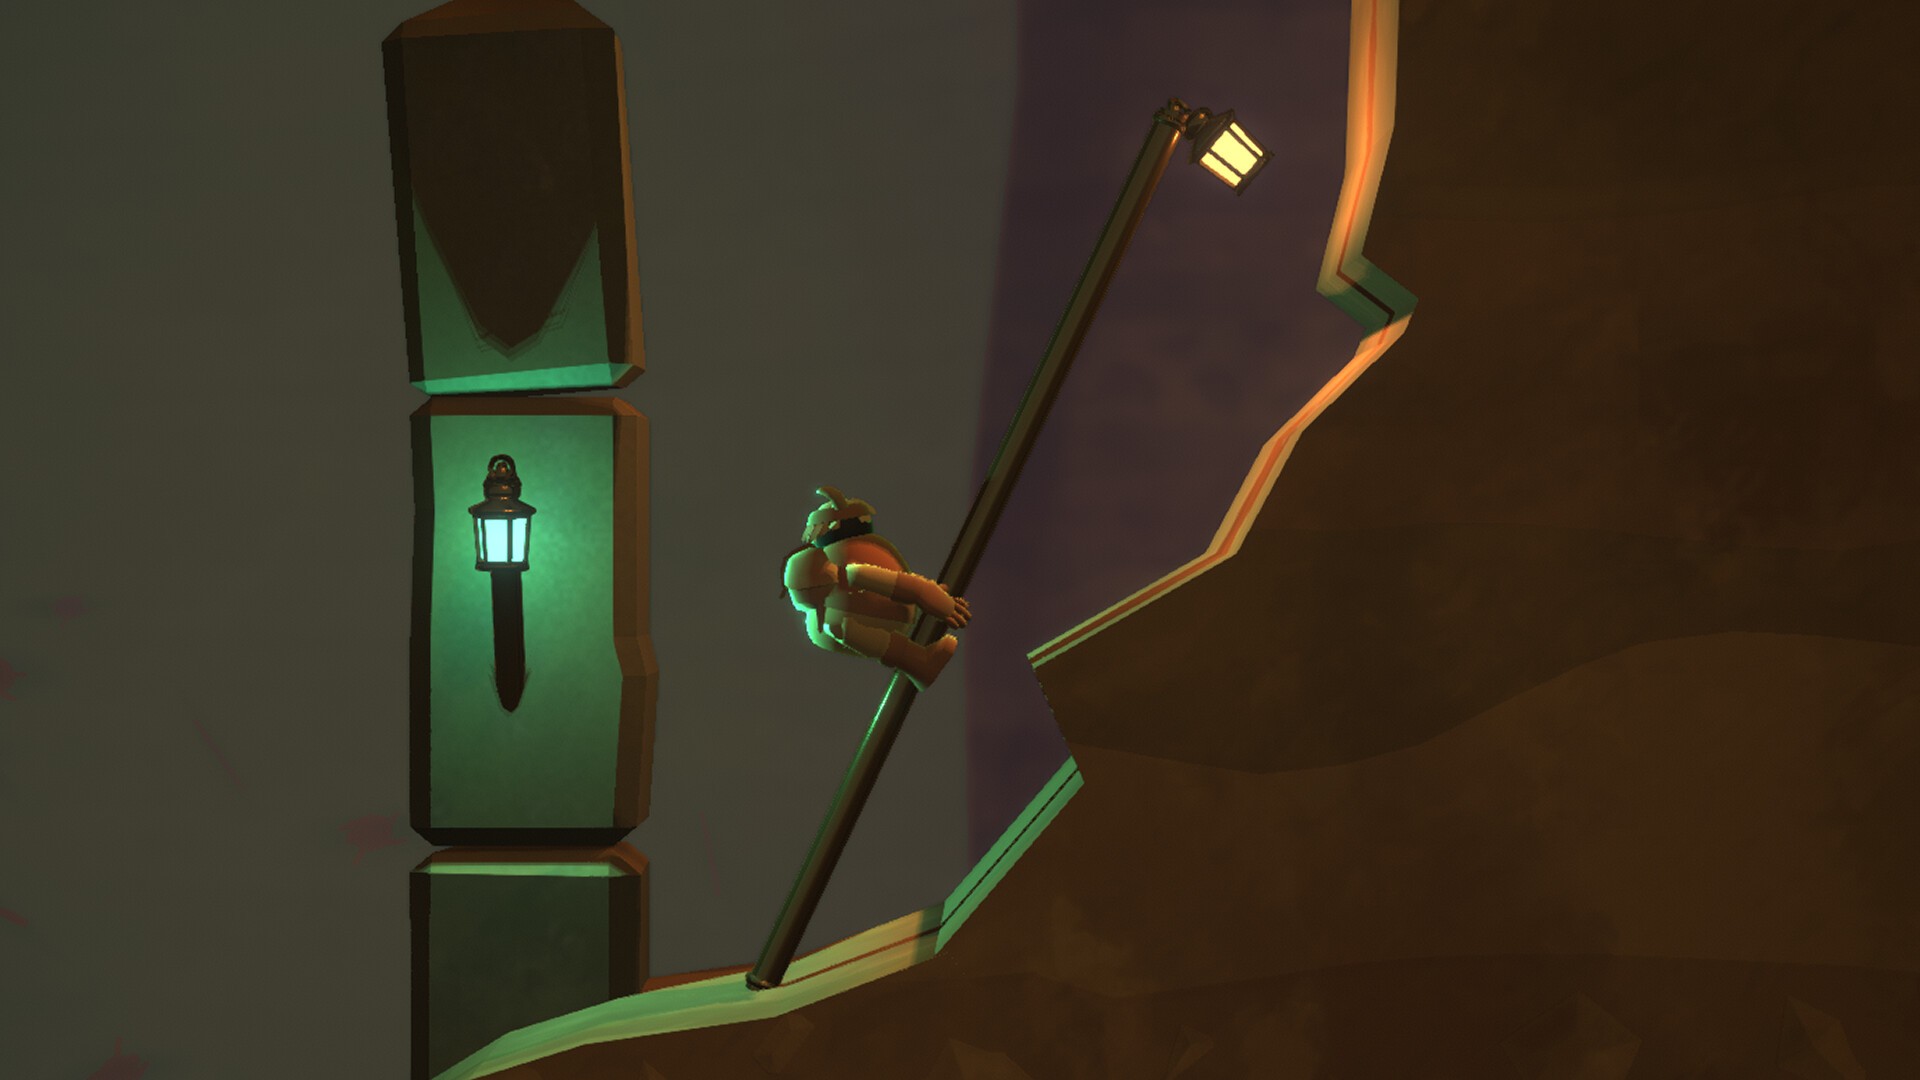 Купить a difficult game about climbing. A difficult game about Climbing.